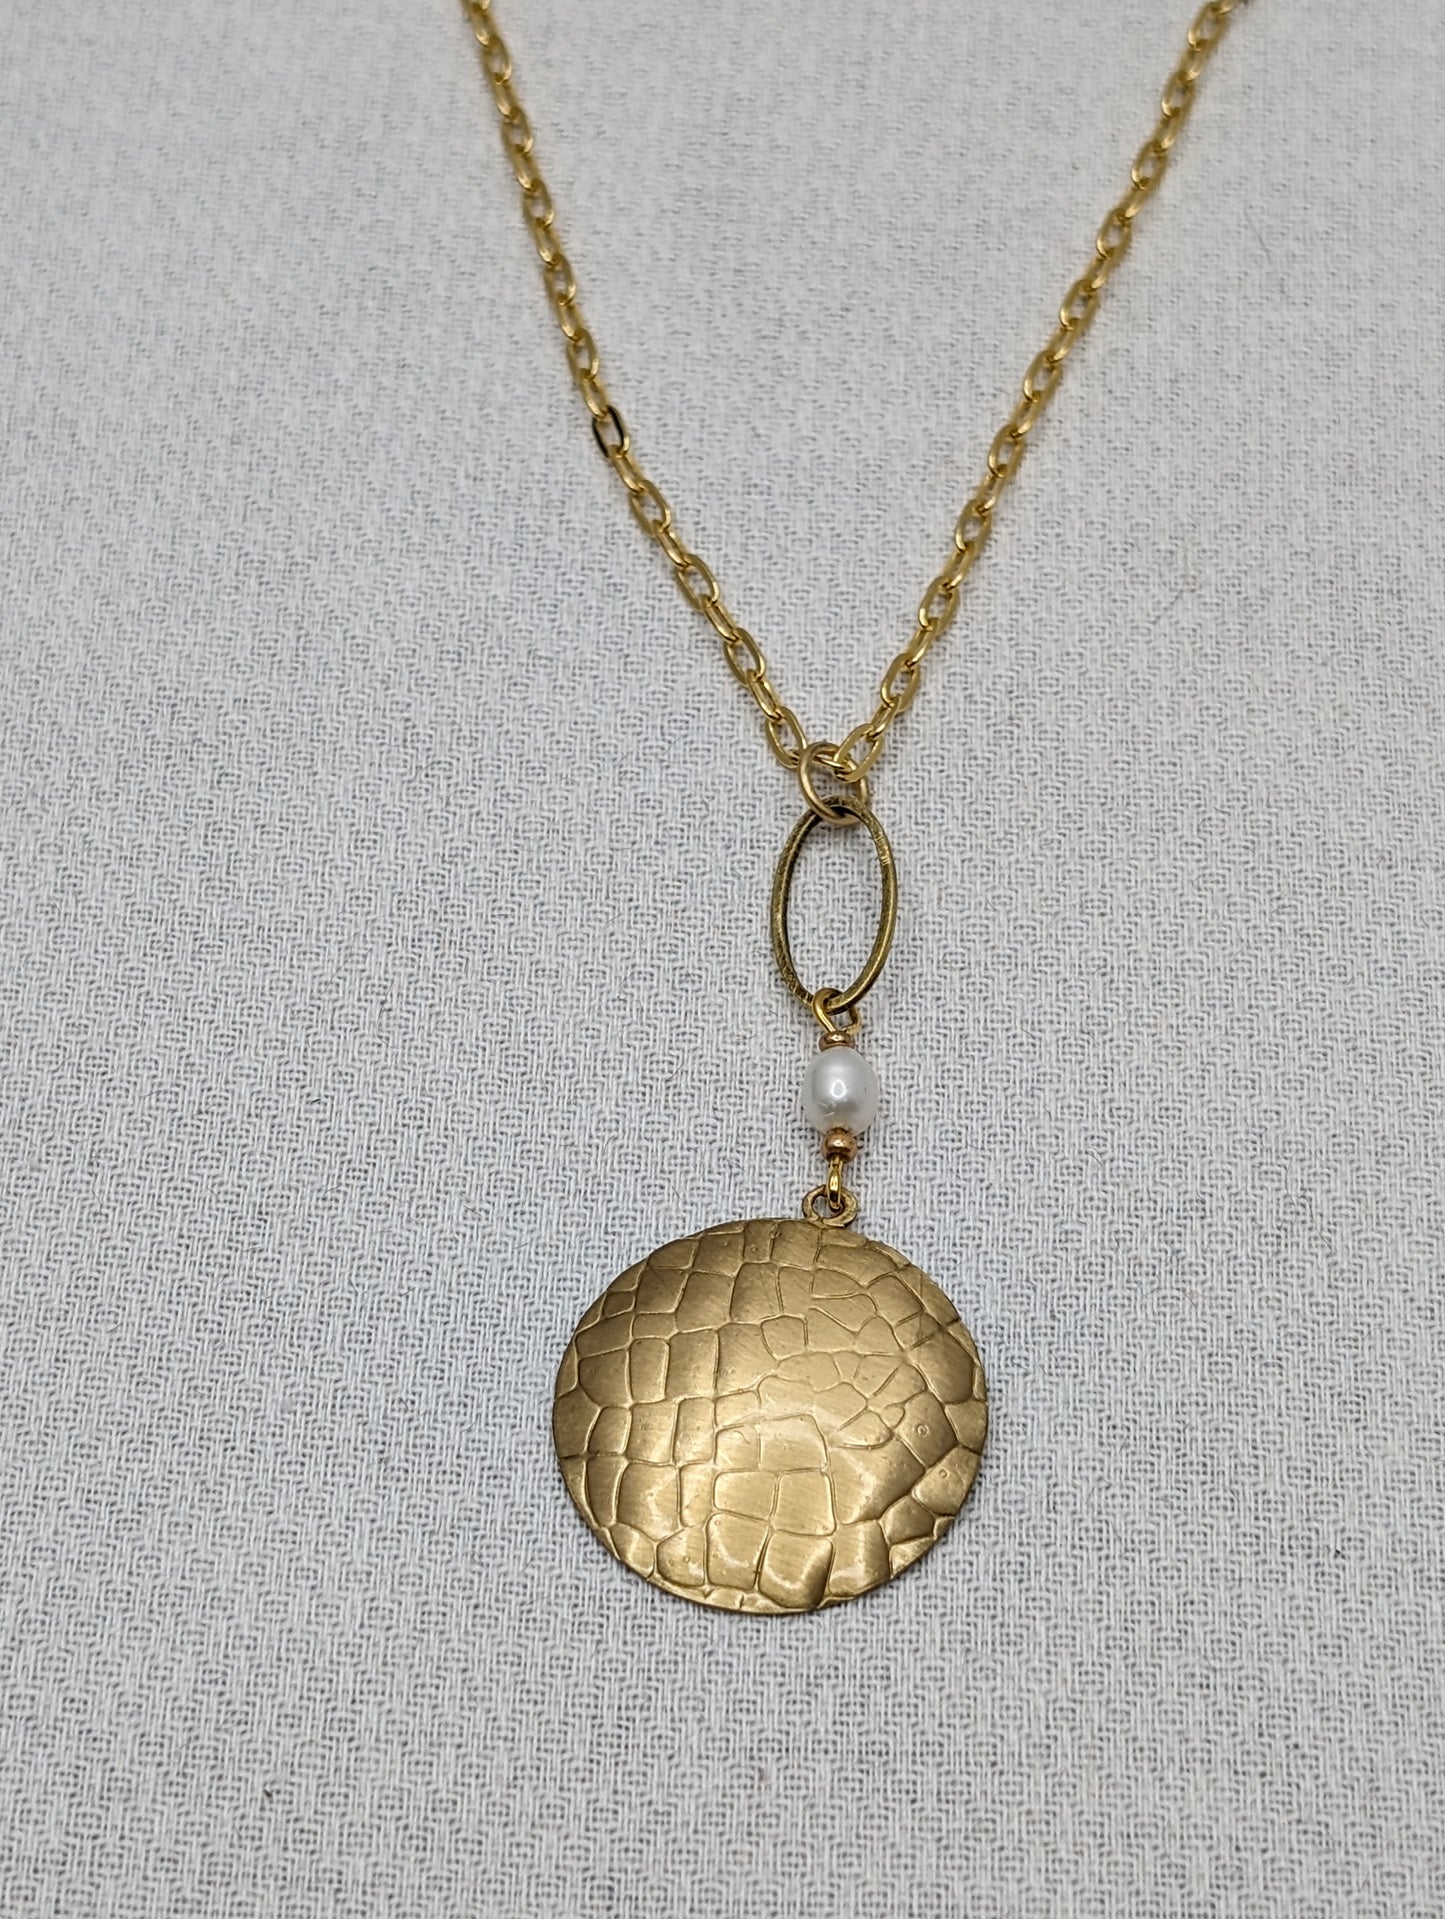 Gilded Brass Embossed Necklace Accented with a Pearl